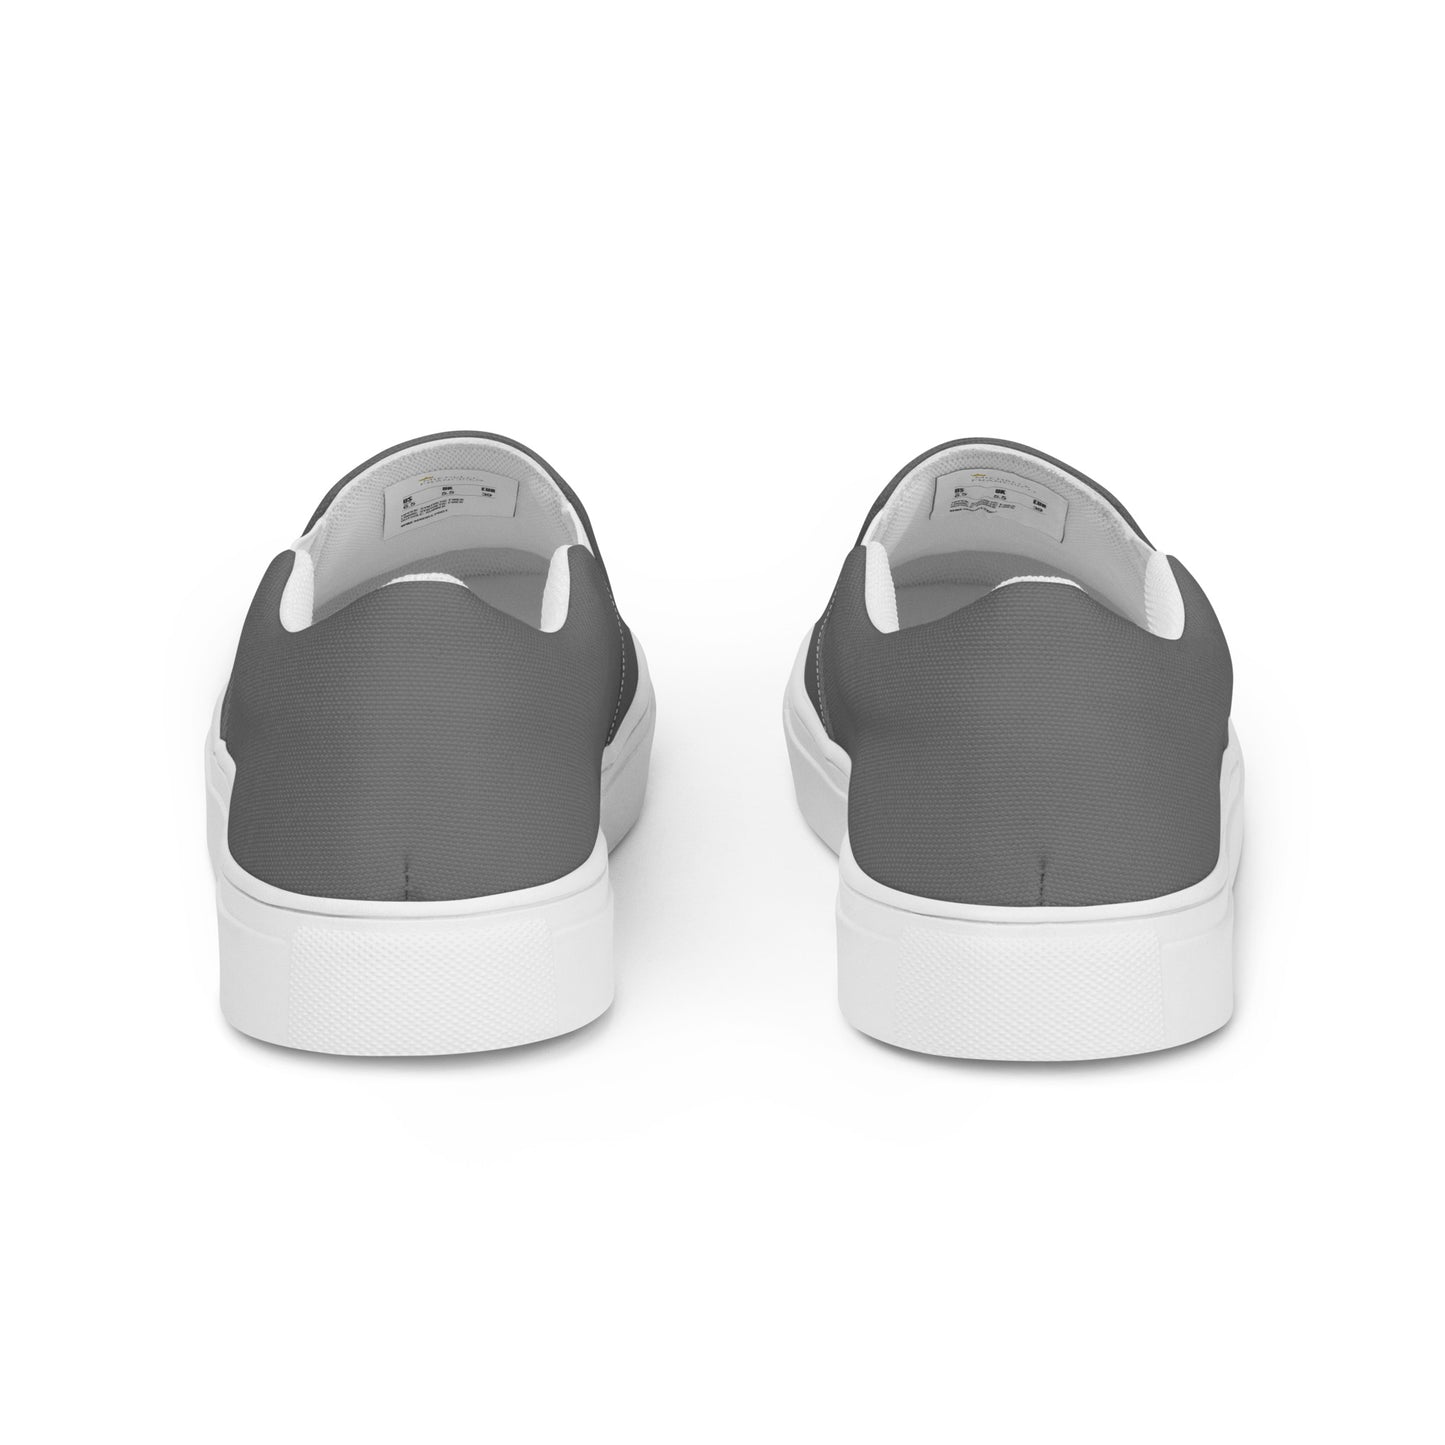 Women’s Grey Slip-on Canvas Shoes